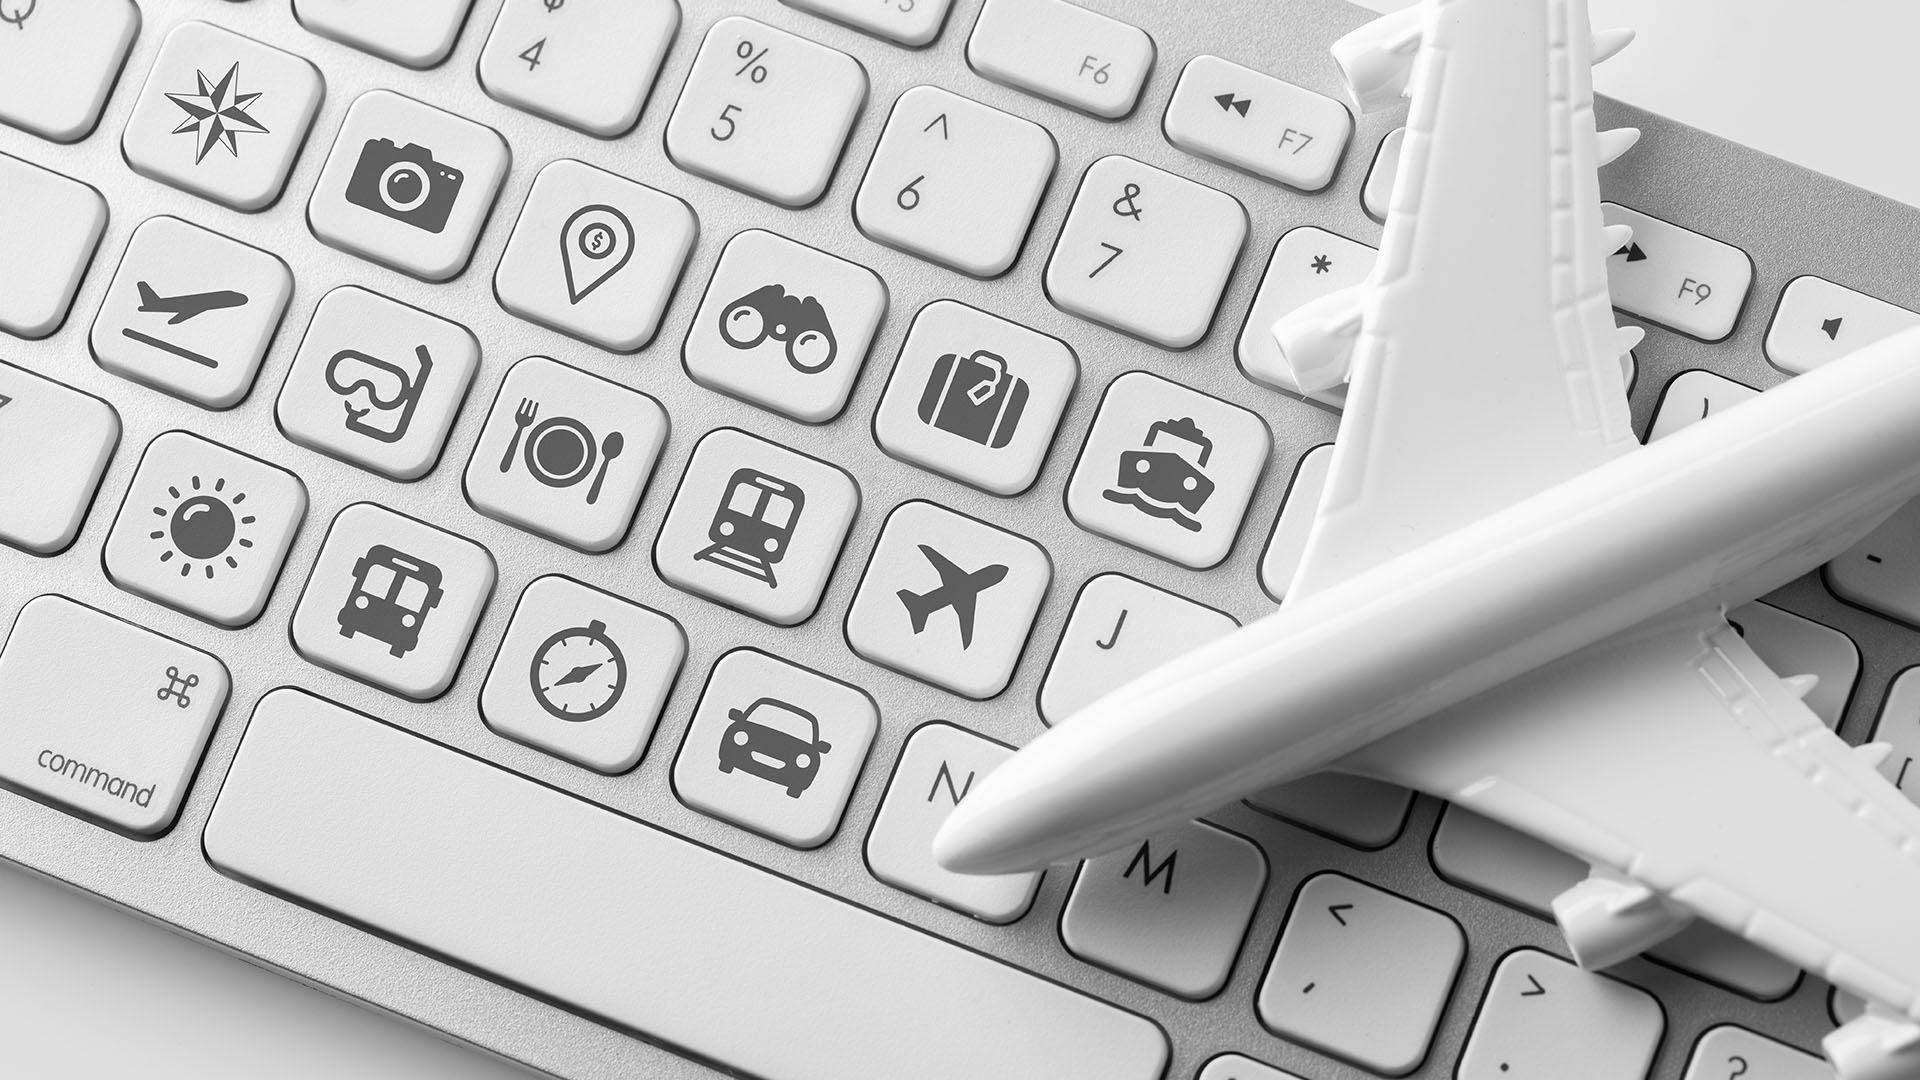 Travel image with keyboard and airplane